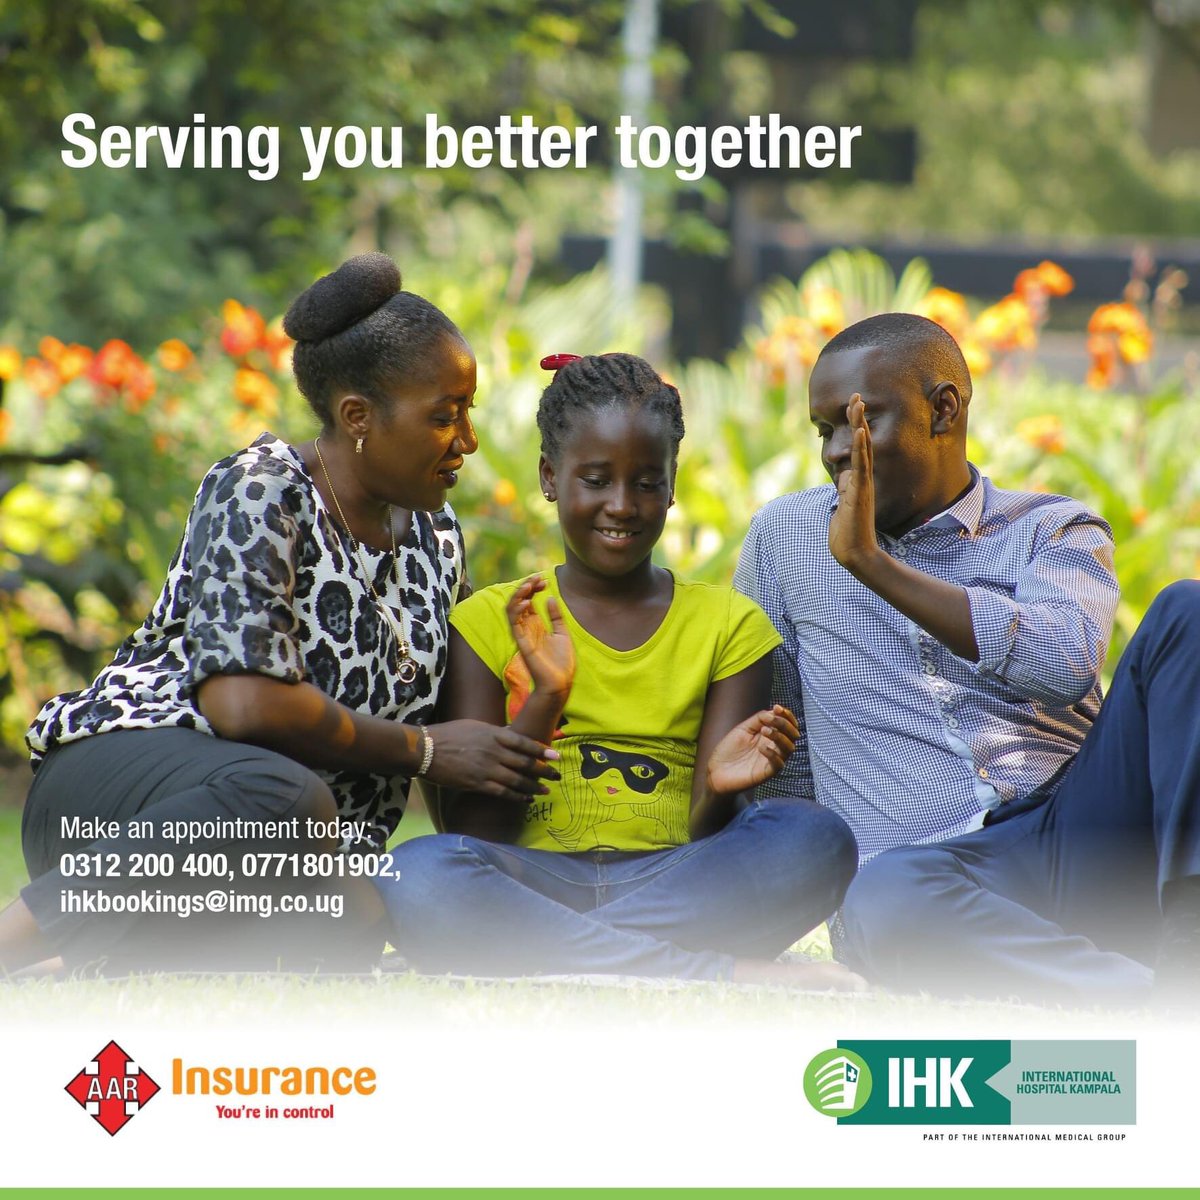 Serving you better together. Book an appointment now on 0312200400, email ihkbookings@img.co.ug or WhatsApp 0771801902. #LookNoFurther #KatutambuleNawe